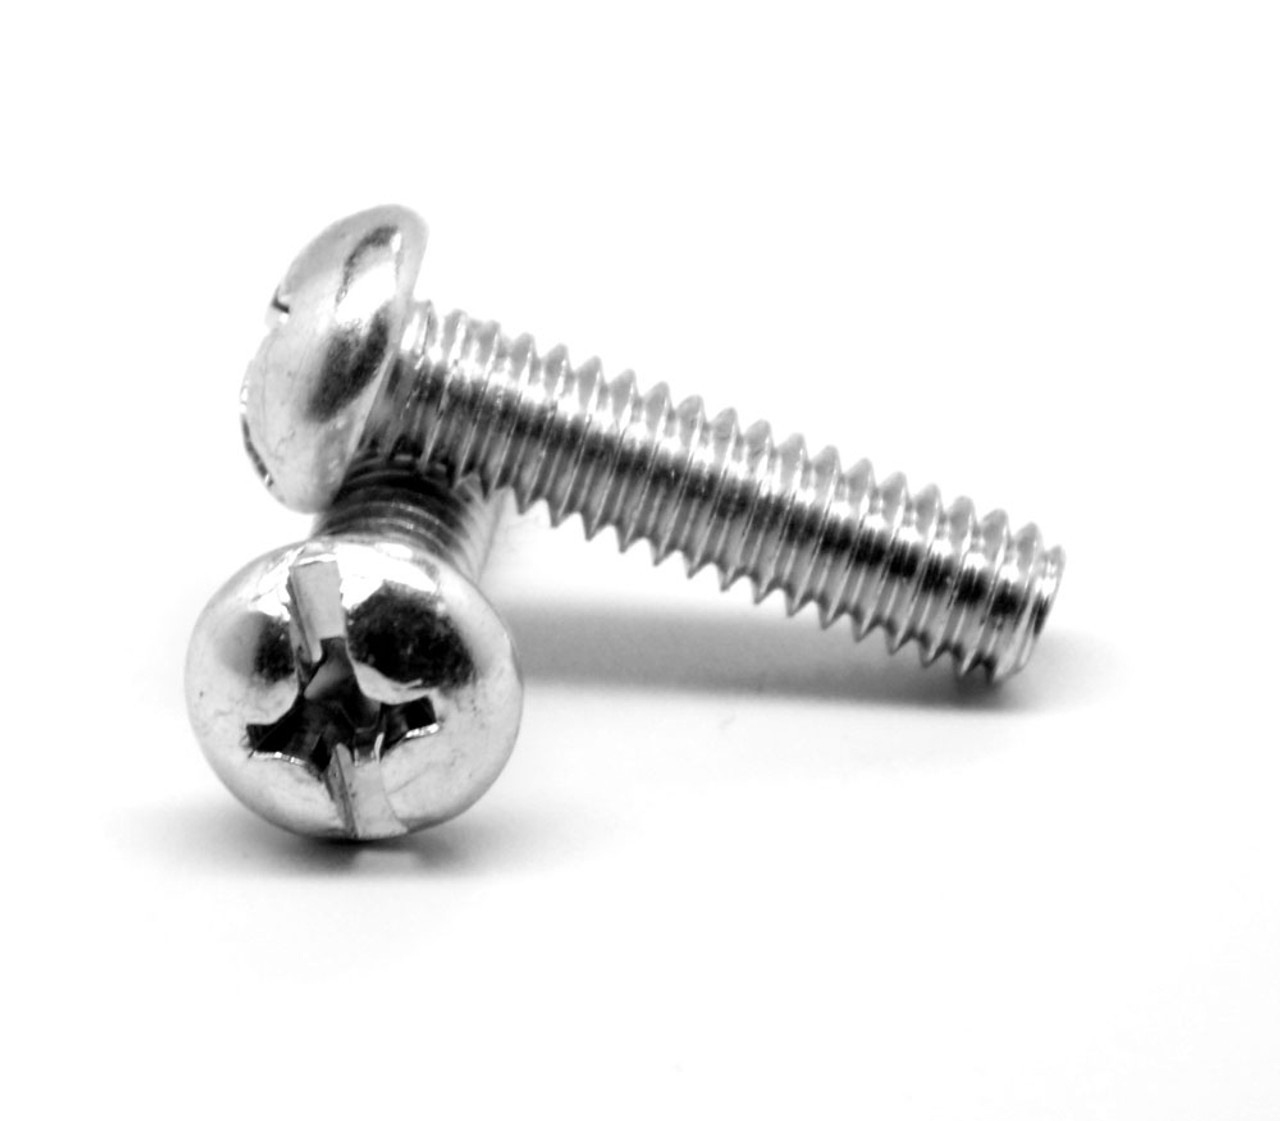 1/4"-20 x 2 1/2" (FT) Coarse Thread Machine Screw Combo (Phillips/Slotted) Round Head Low Carbon Steel Zinc Plated